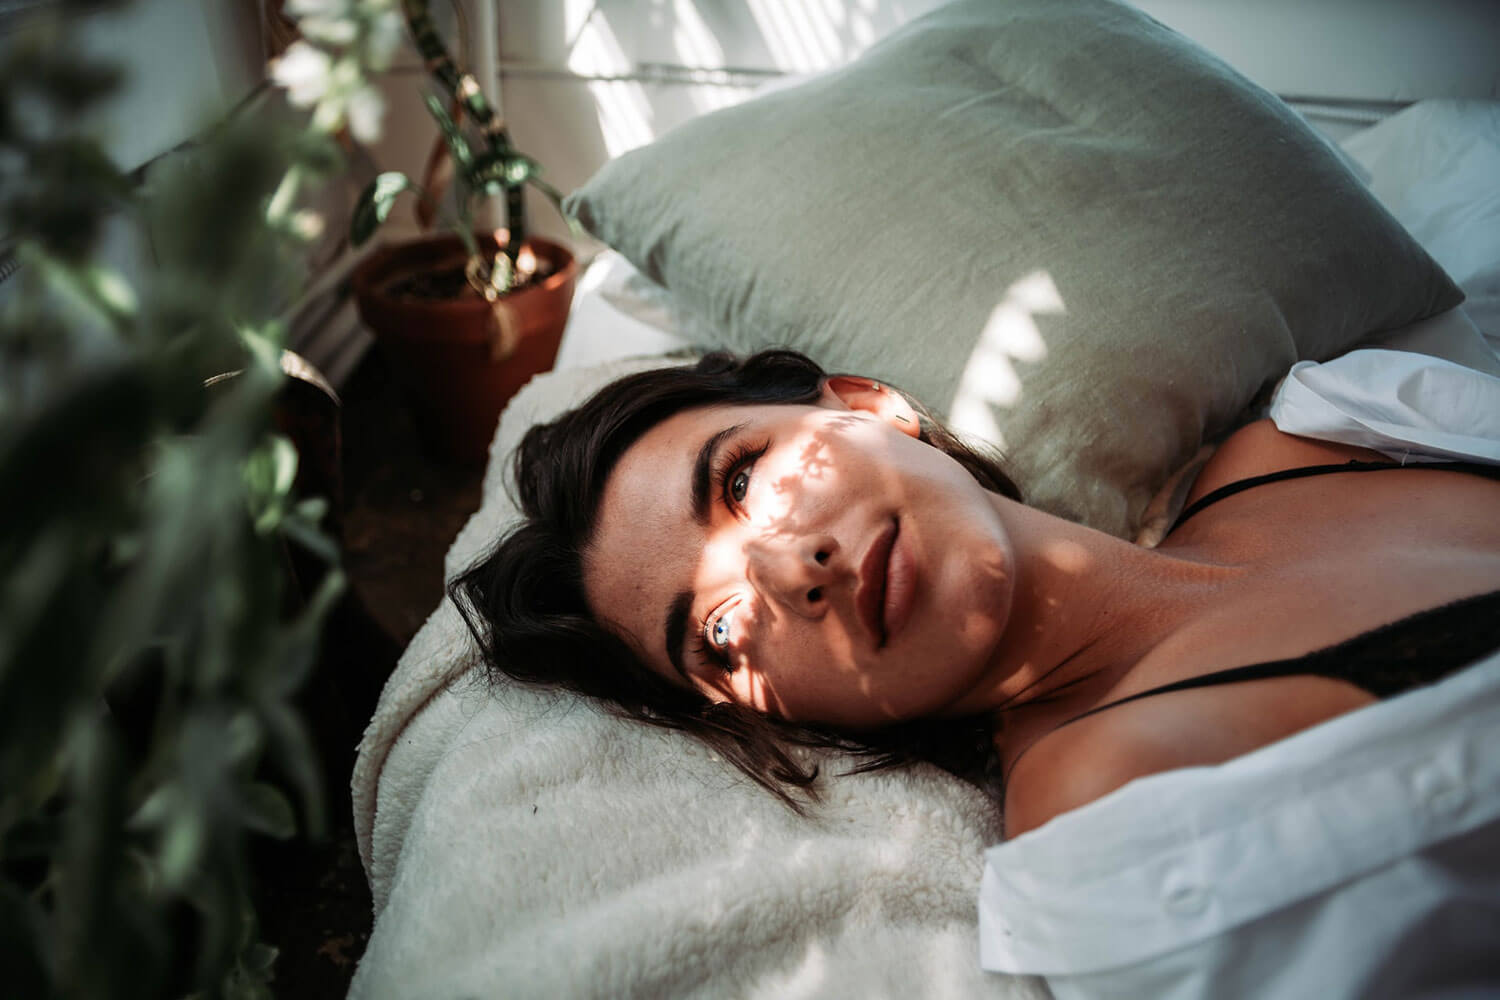 Woman beside a plant at a spa laying on bed